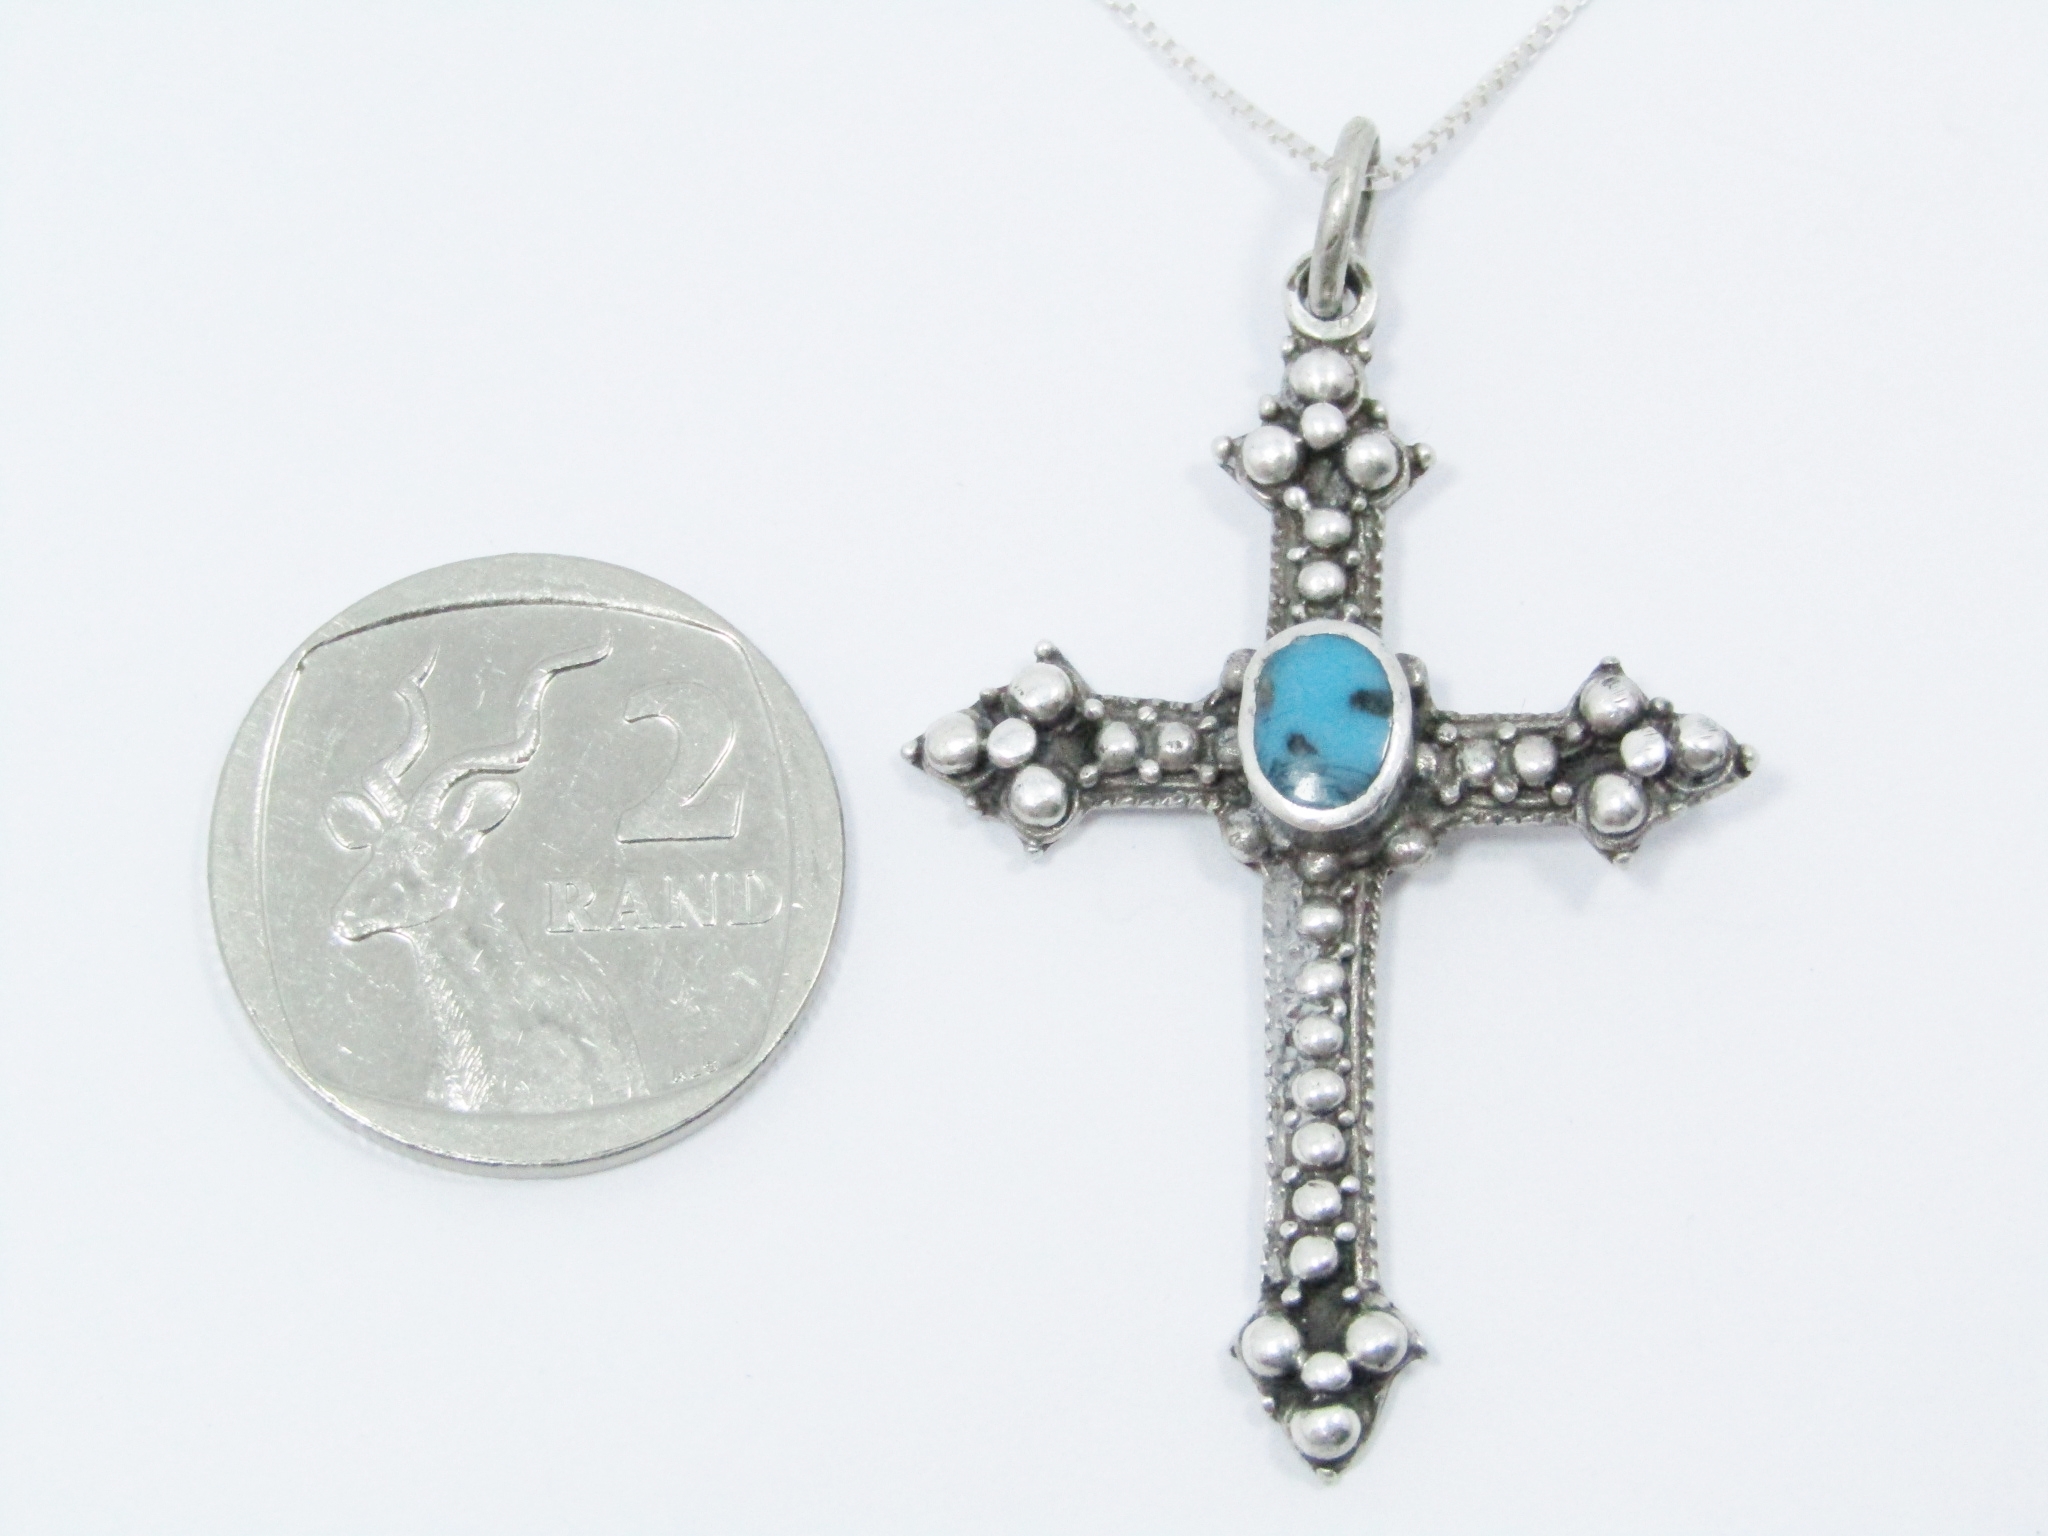 A Gorgeous Detailed Turquois Cross On Chain in Sterling Silver.